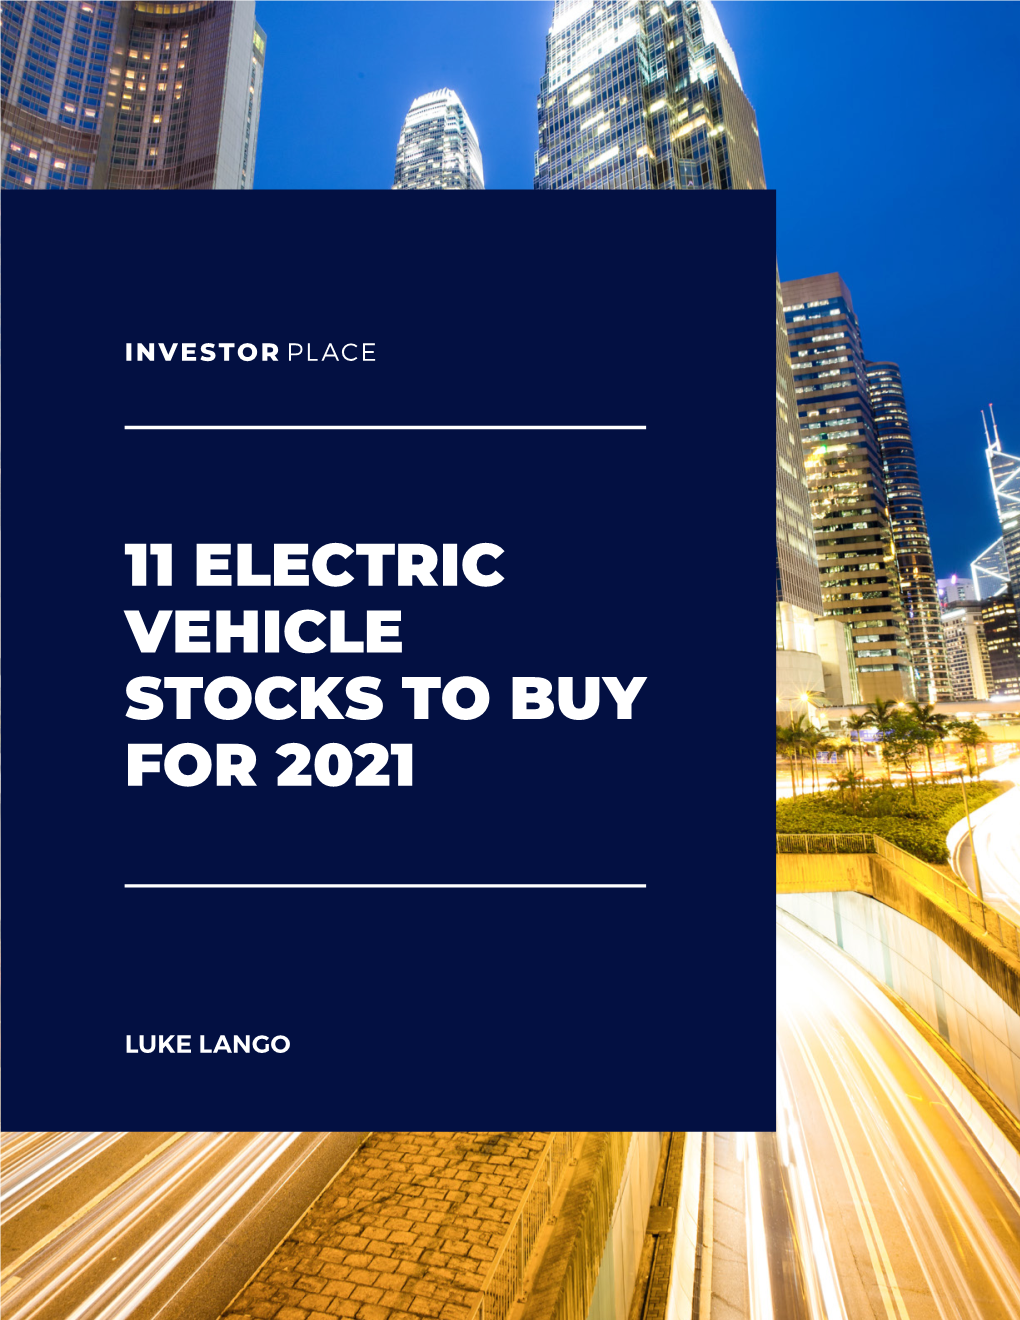 11 Electric Vehicle Stocks to Buy for 2021